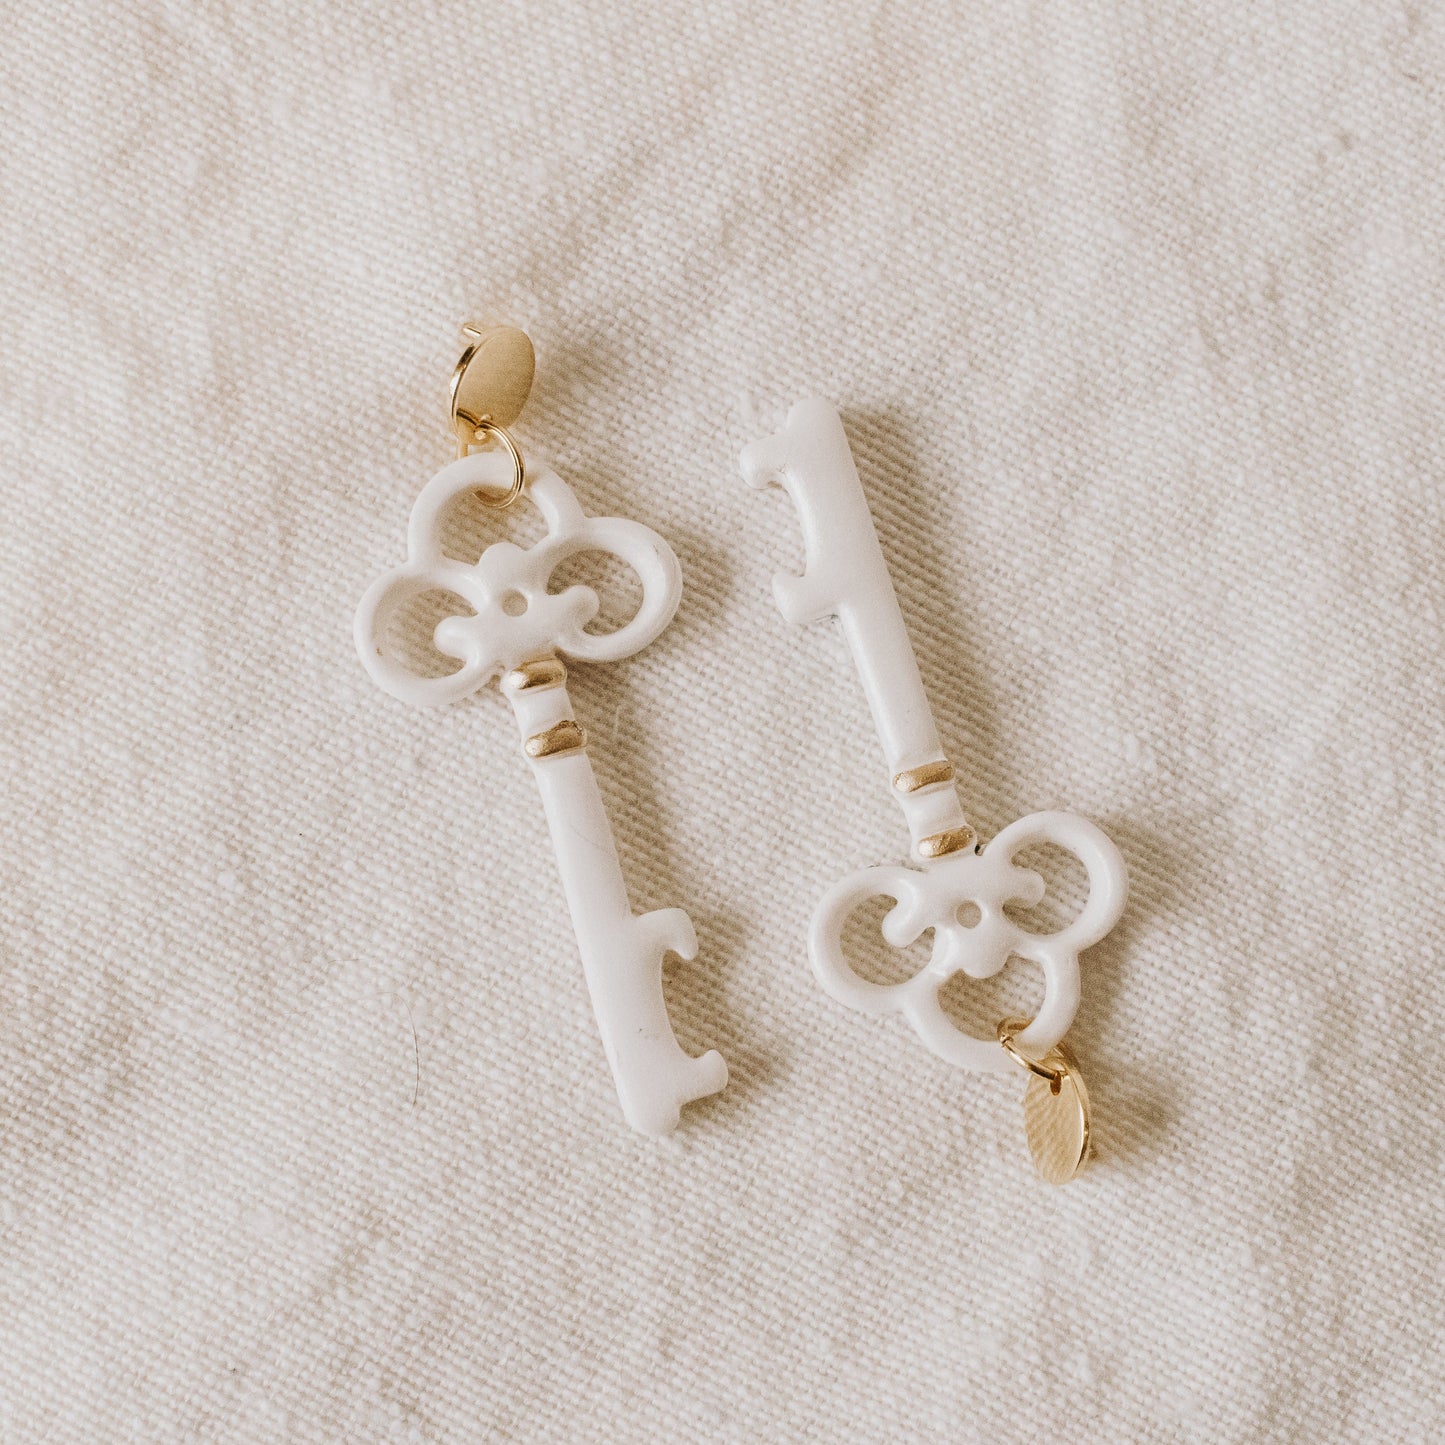 White and Gold Christmas Key Earrings - Claymore NZ - Earrings